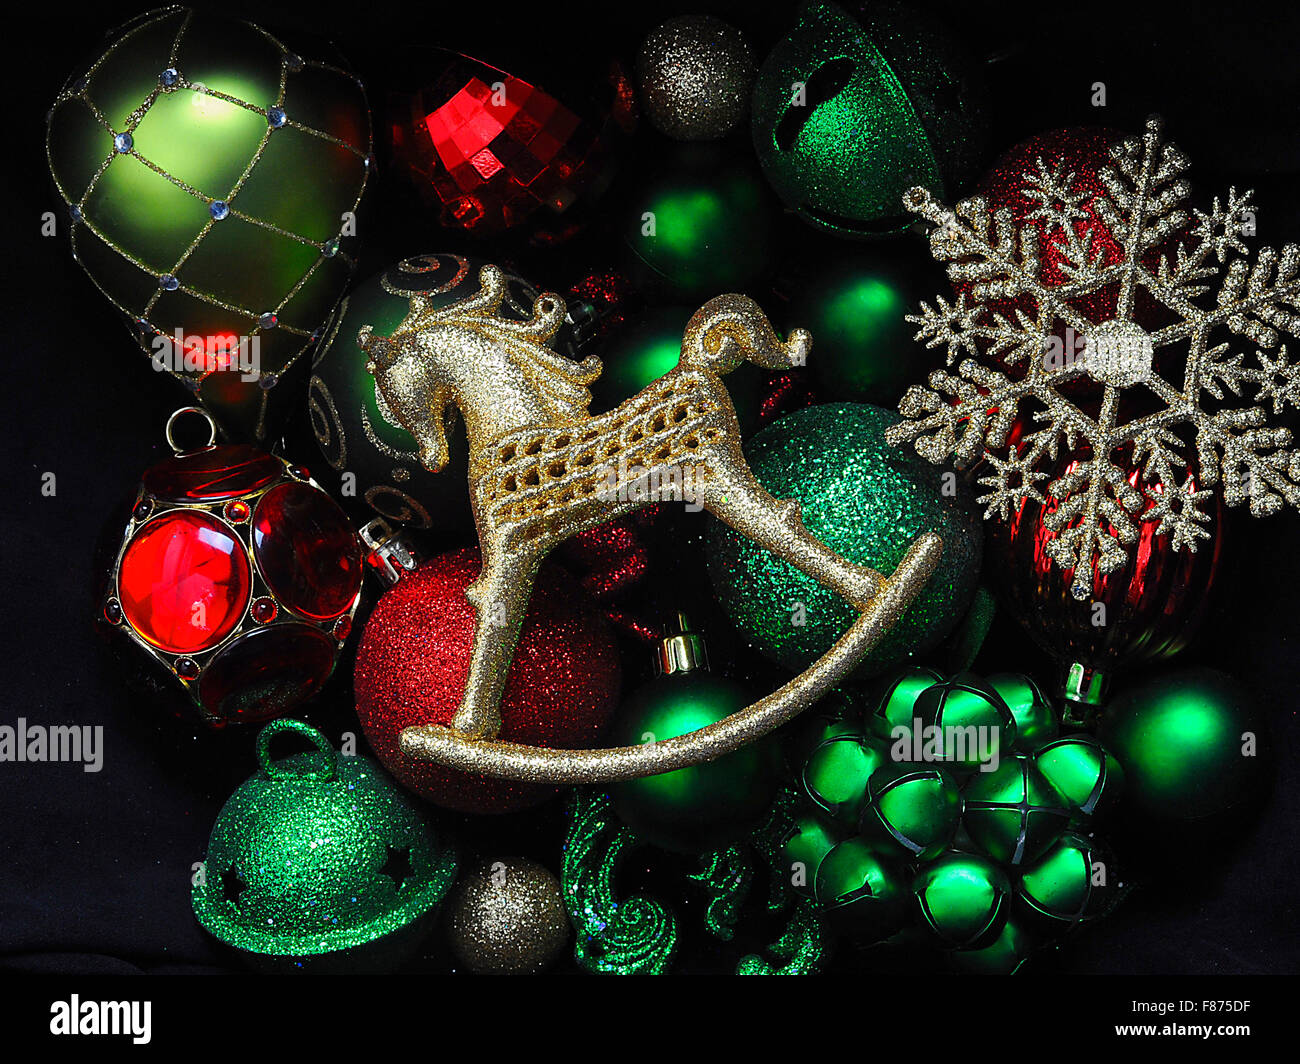 Sparkly Chsristmas decorations Stock Photo